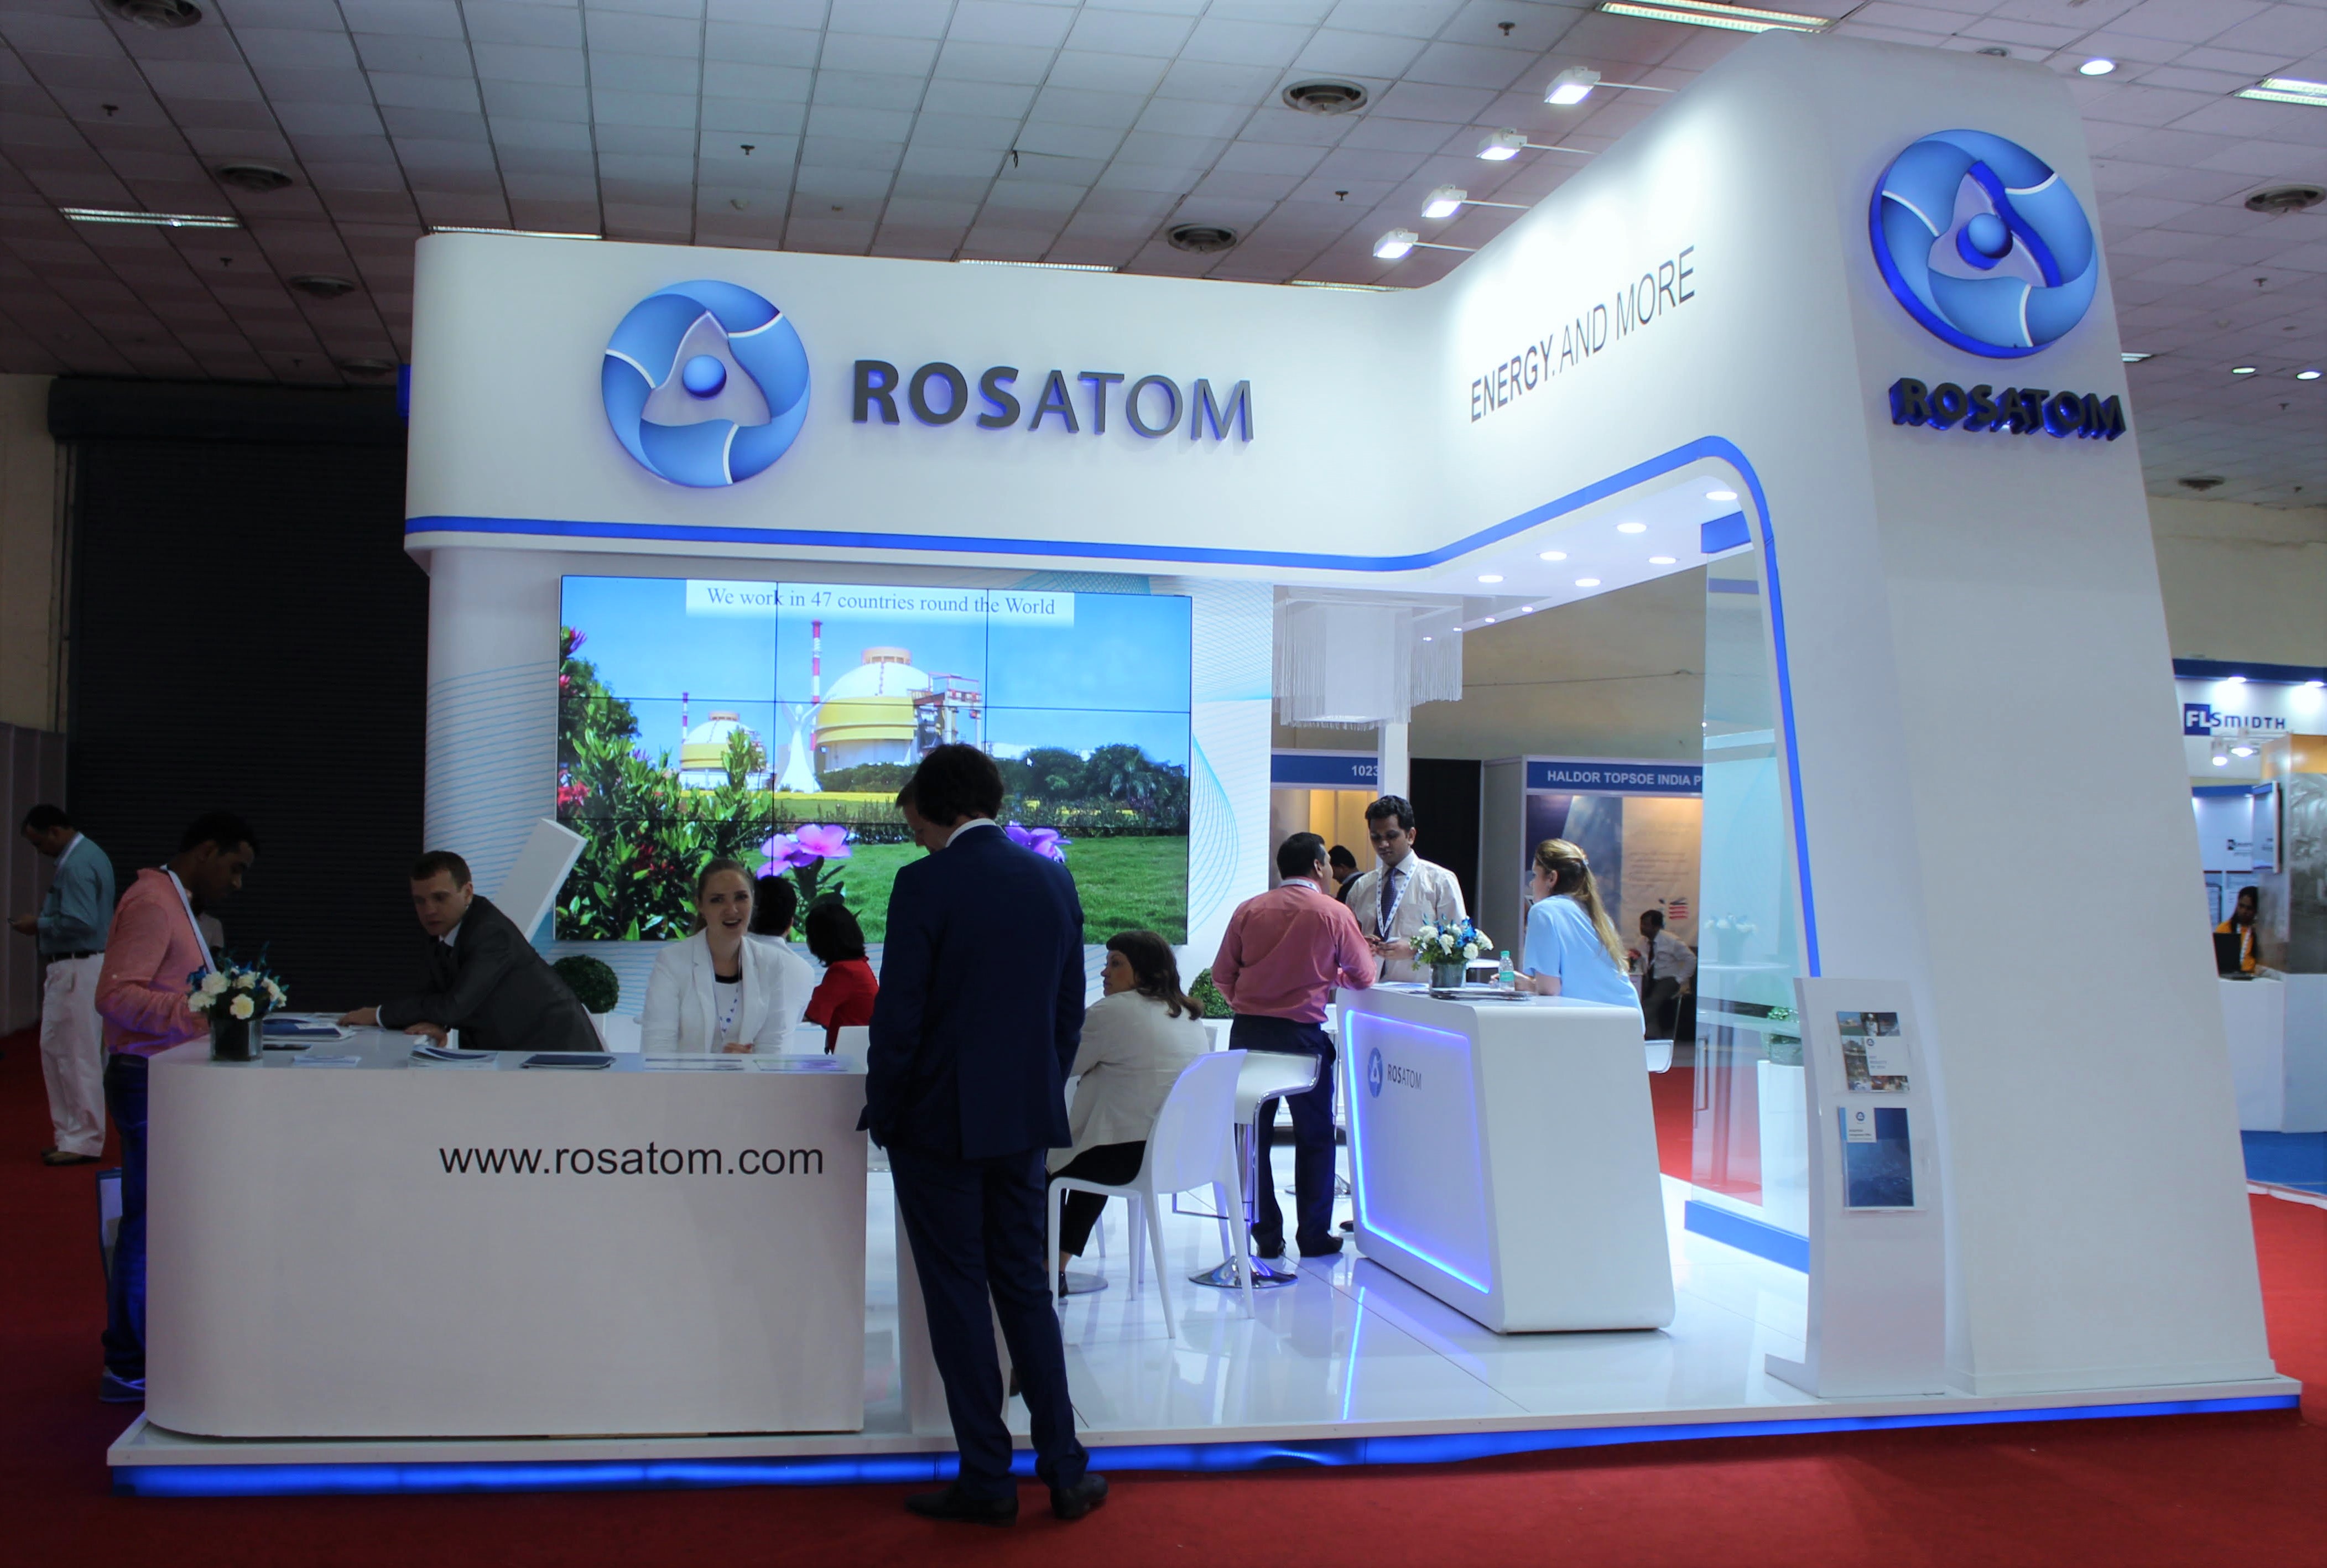 Russia's state-run nuclear power corporation, Rosatom, built the KNPP, which is now being operated by the Nuclear Power Corporation of India (NPCIL).